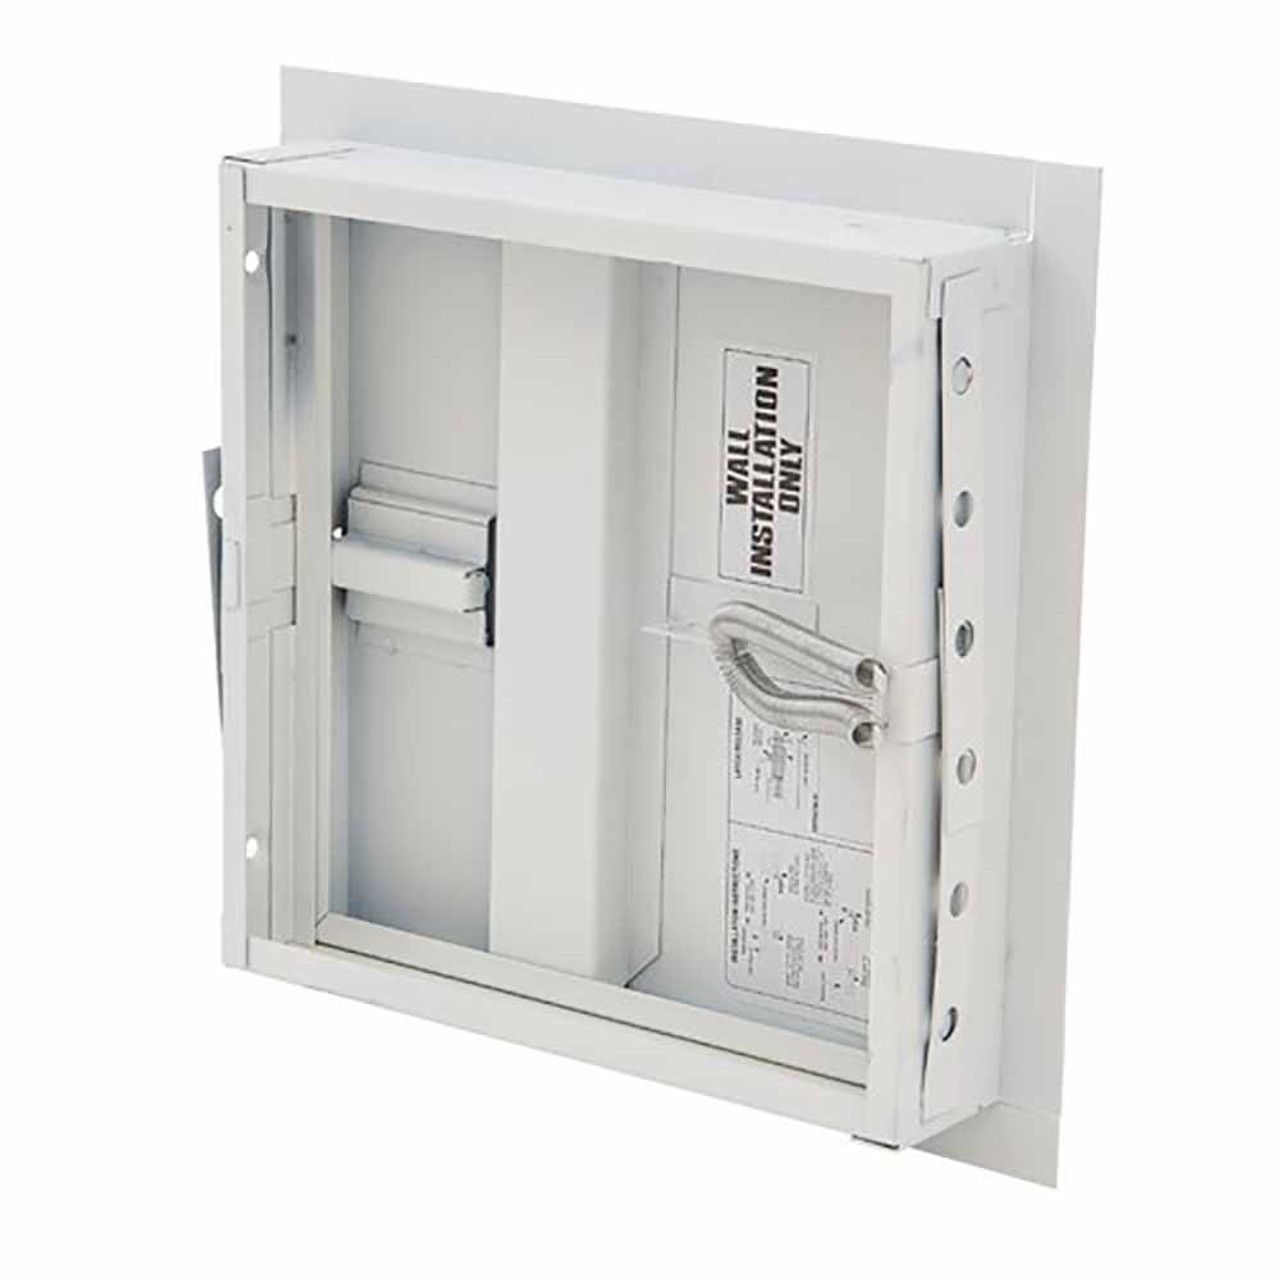 36" x 36" Aluminum Fire Rated Floor Door without Automatic Closing System - Bilco